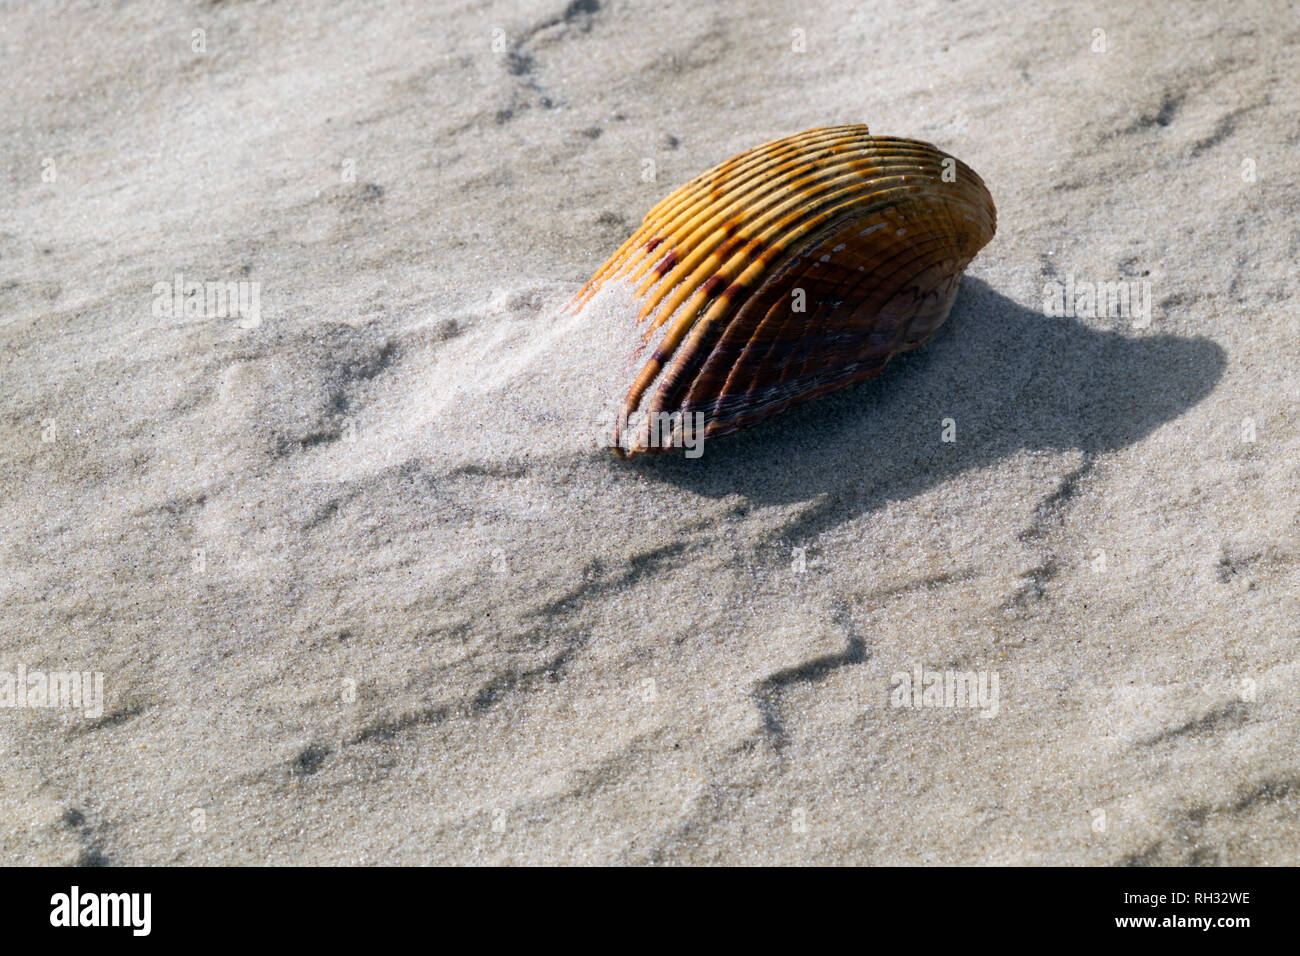 Seashells on the beach near Fort Morgan, Alabama. Close up shows patterns in the sand caused by wind and water erosion. Stock Photo